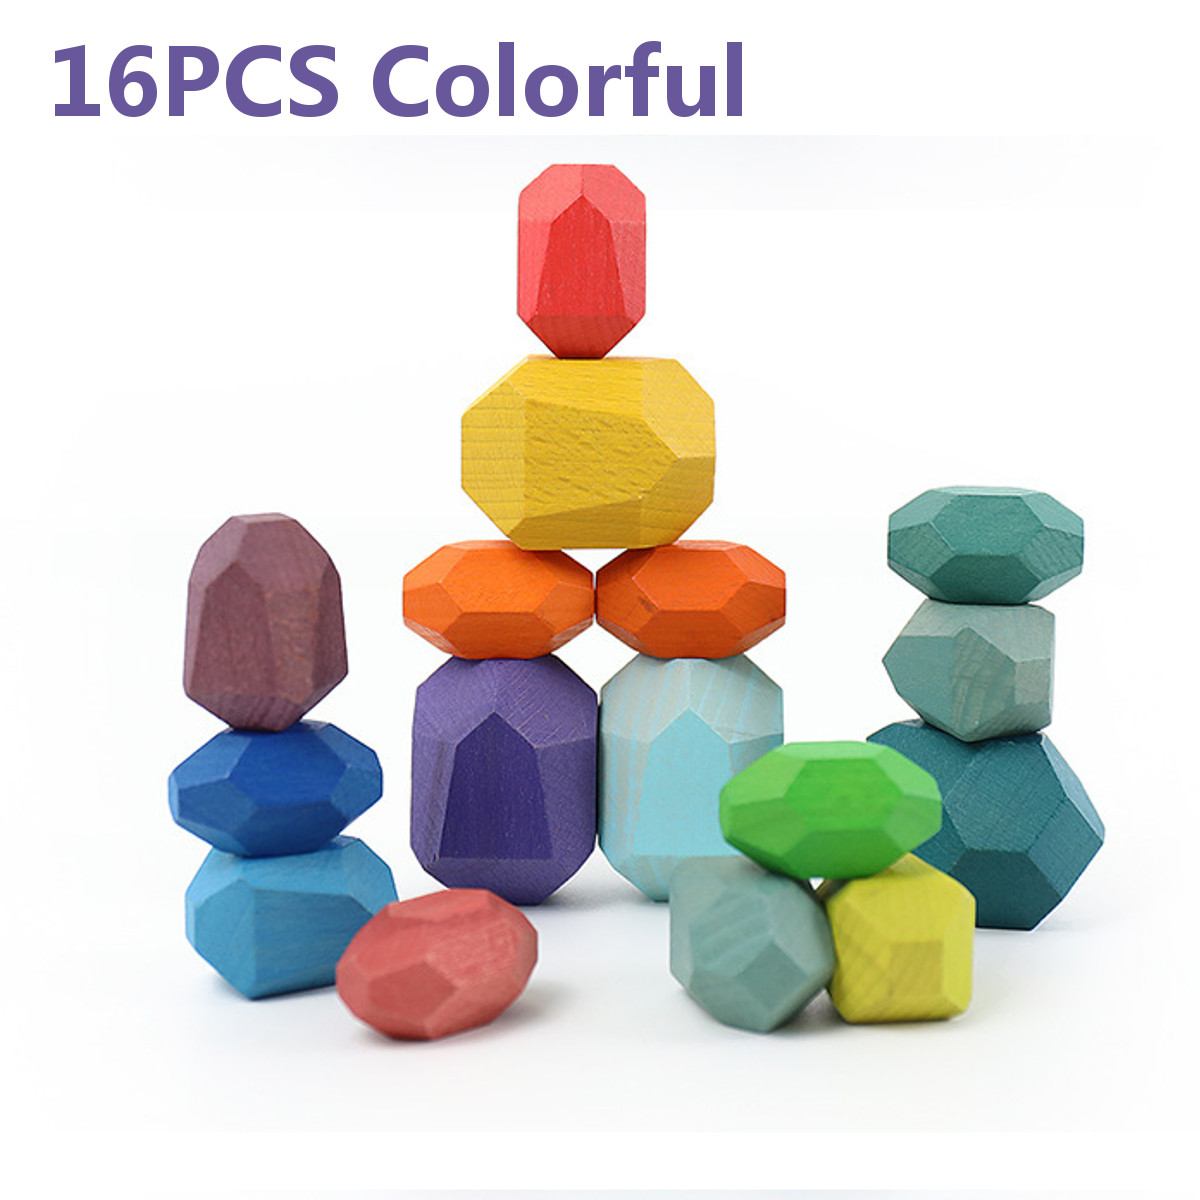 101626-Pcs-Wood-Colorful-Stone-Stacking-Game-Building-Block-Education-Set-Toy-for-Kids-Gift-1887123-4